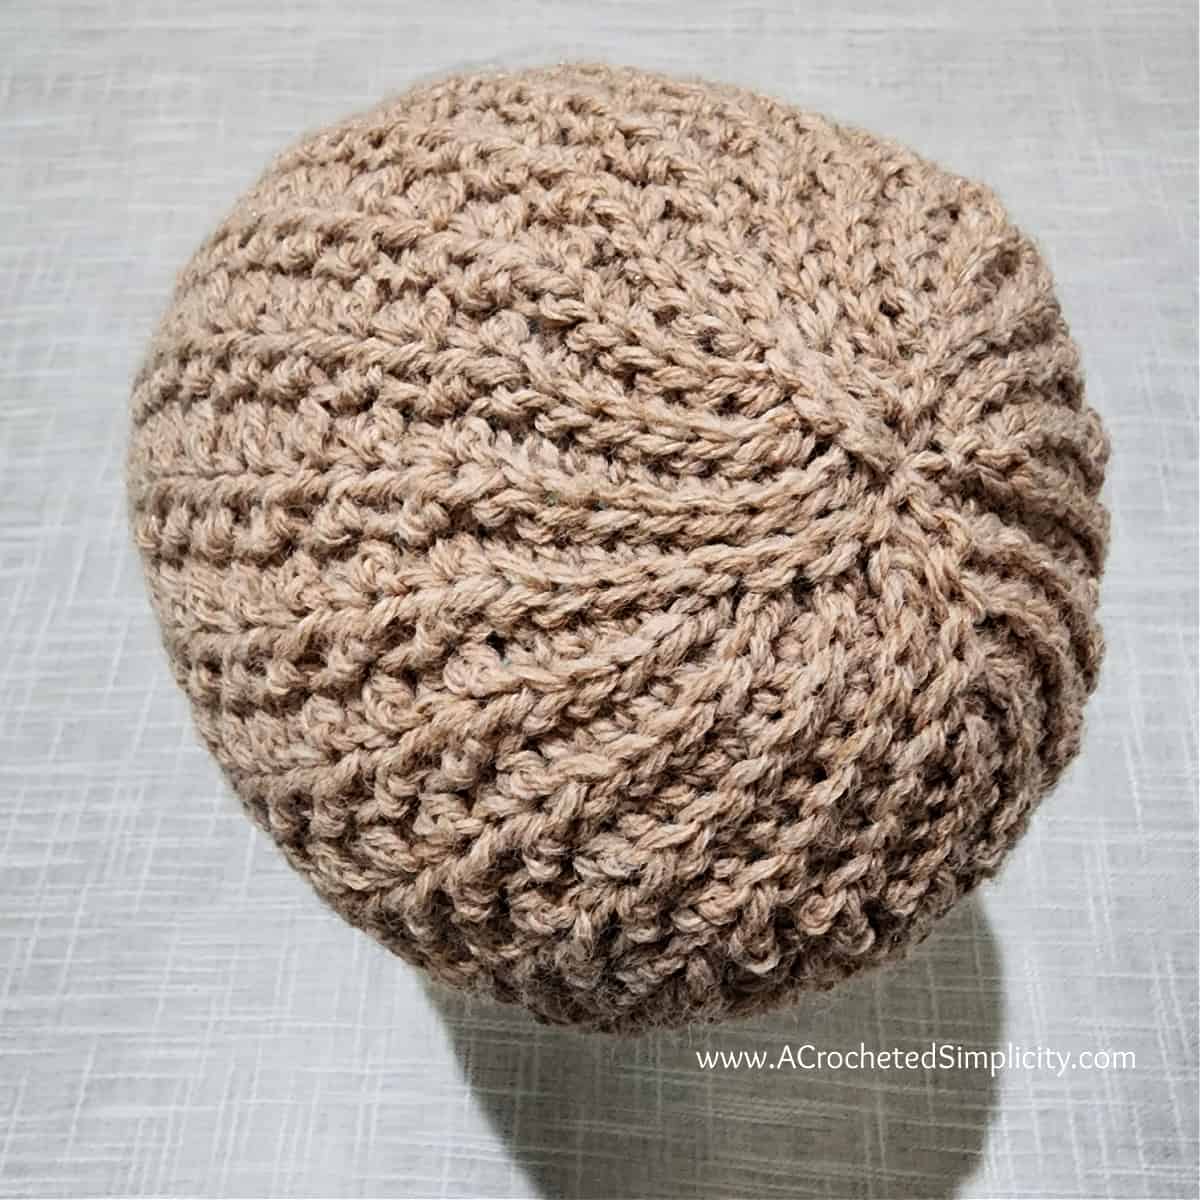 Top of a brown short row crochet hat showing the short row crown.